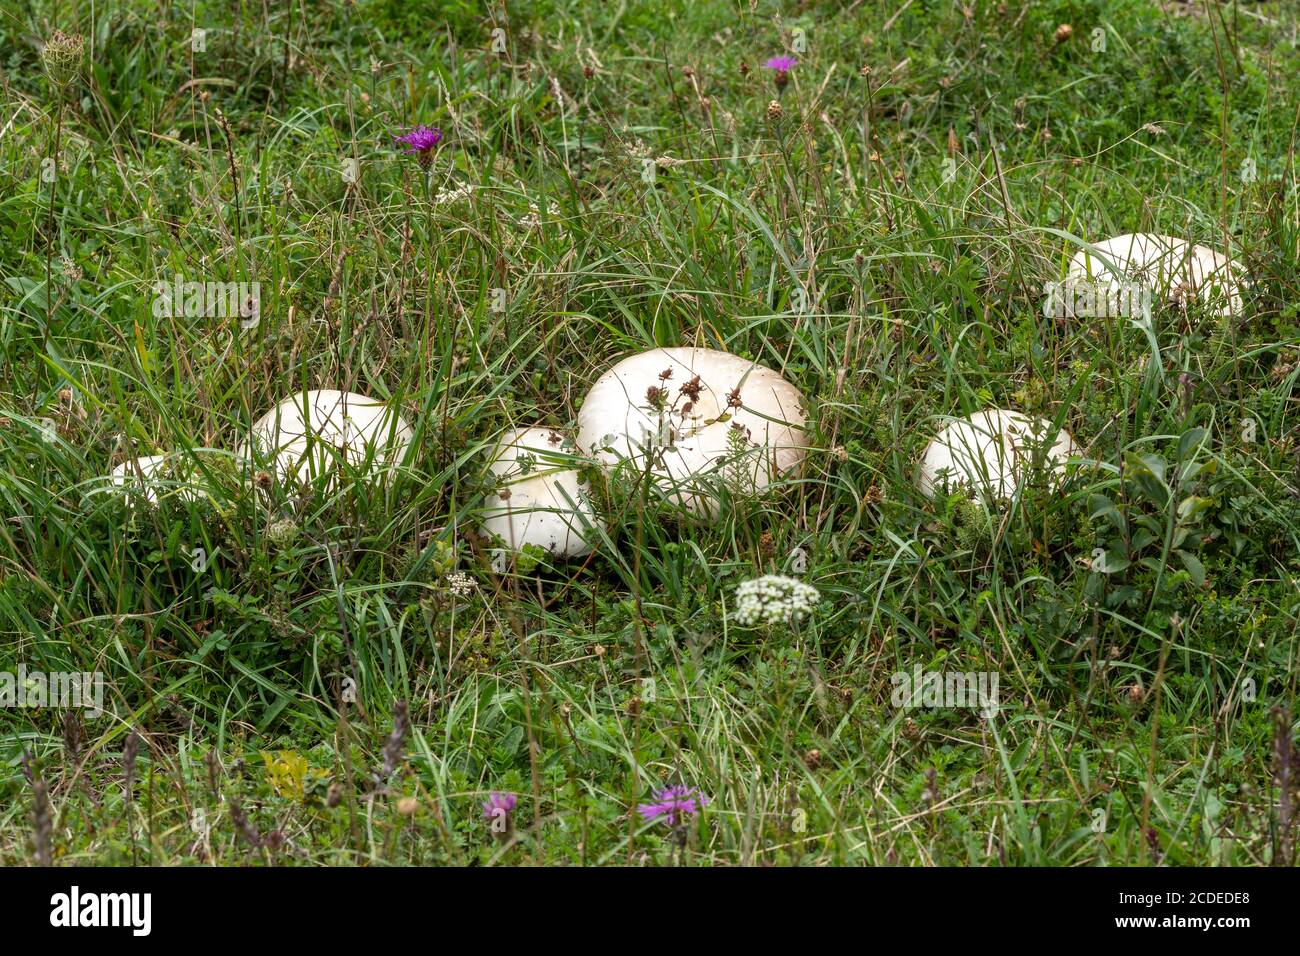 Edible field Mushrooms (Agaricus campestris, also known as meadow mushrooms) growing wild among grass during early autumn, UK Stock Photo